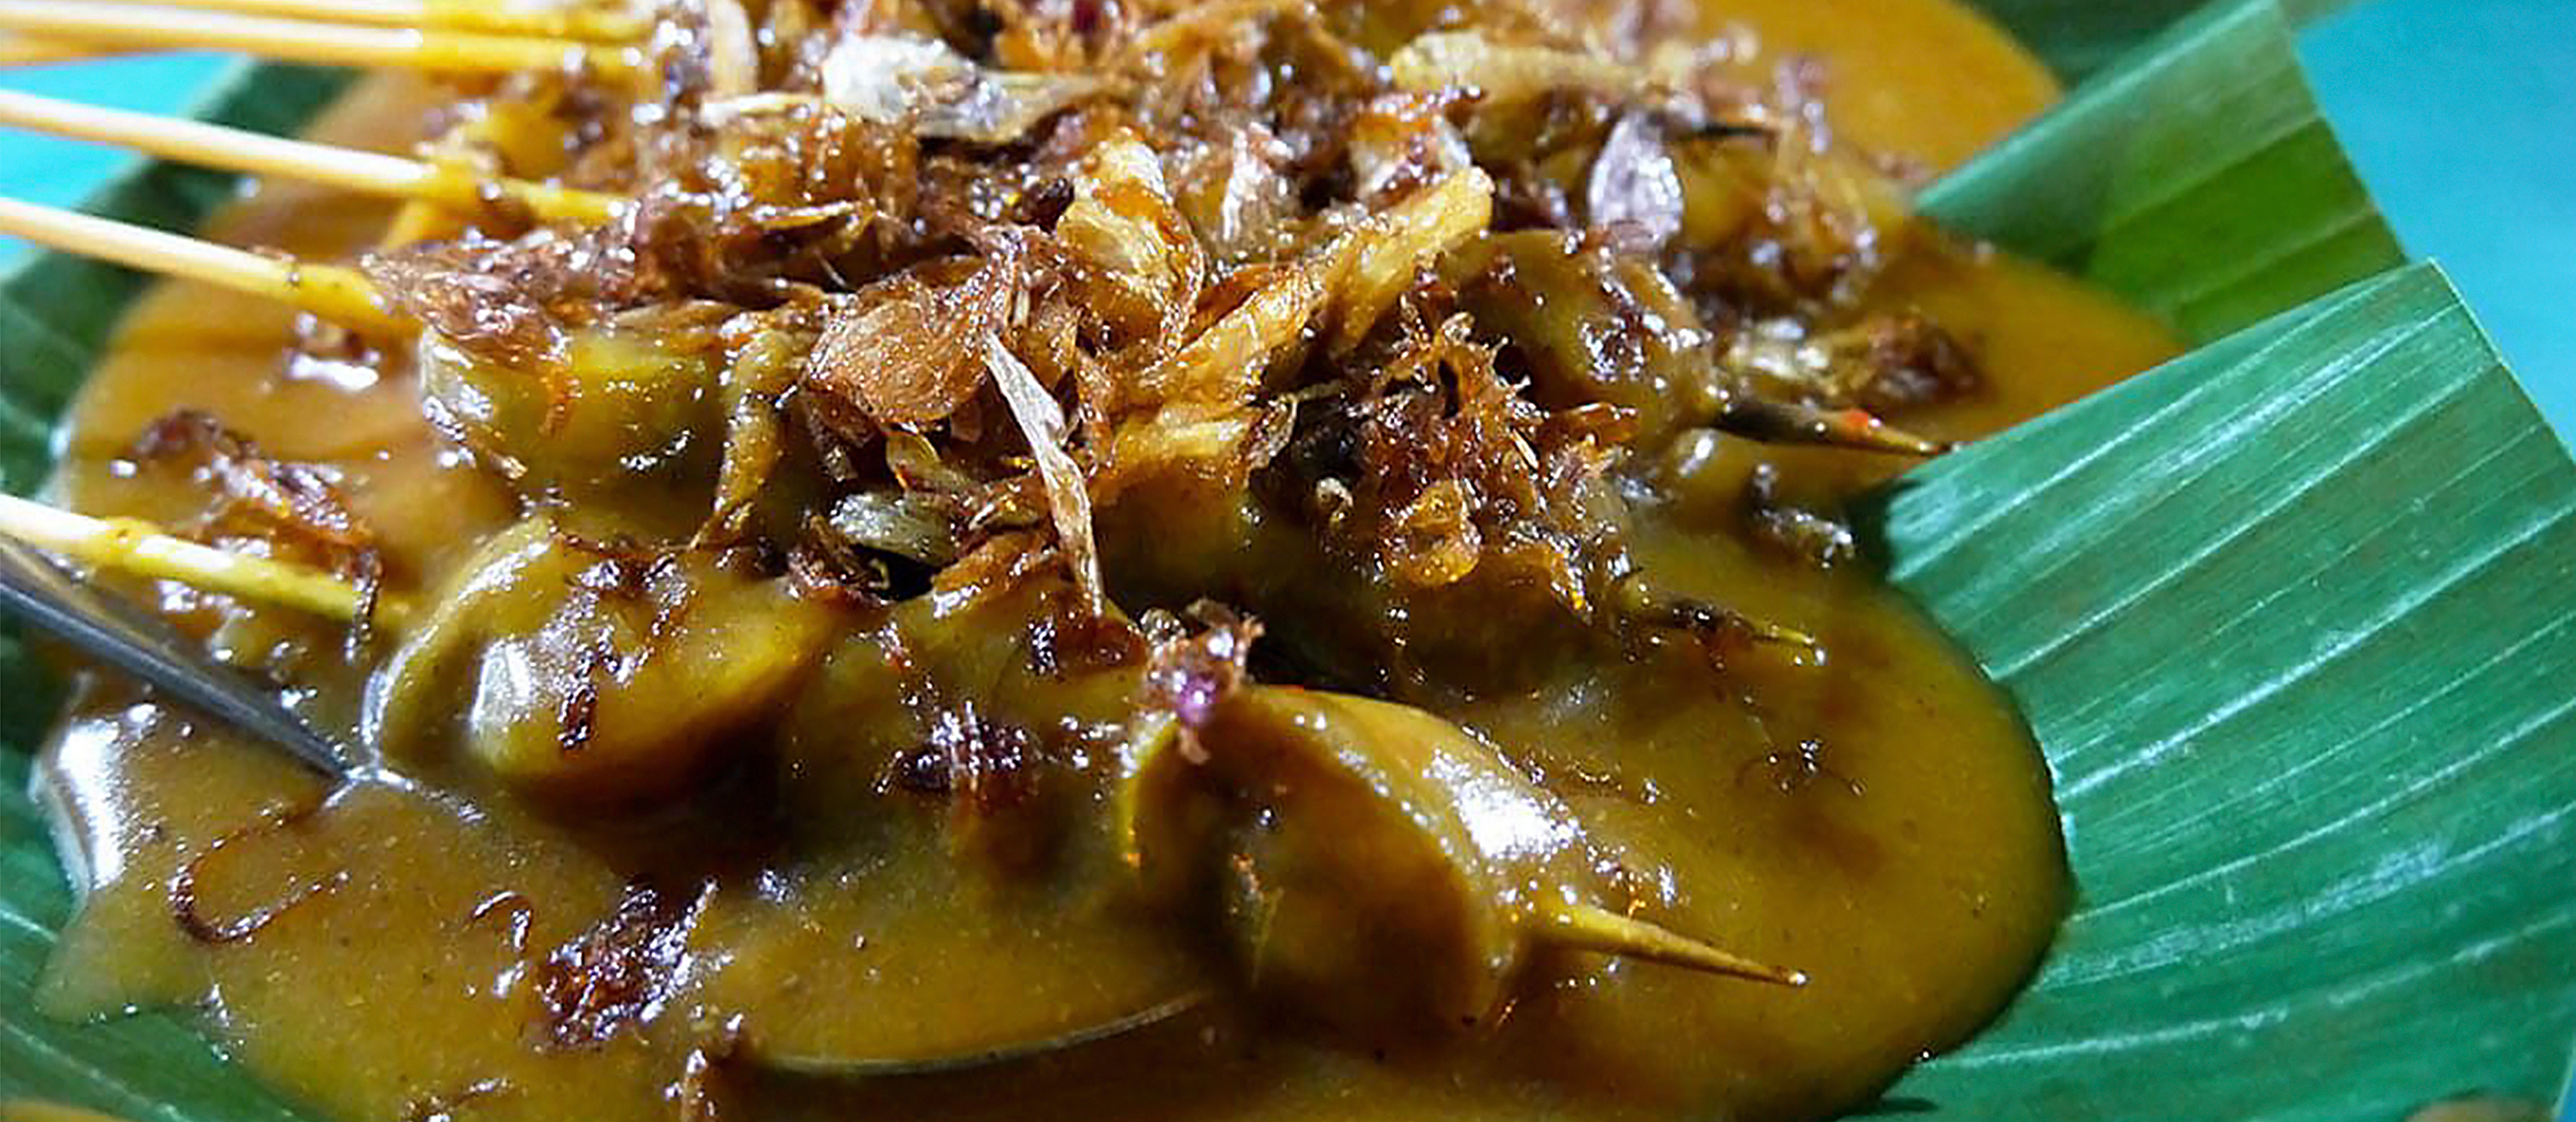 Sate Padang | Traditional Beef Dish From West Sumatra, Indonesia